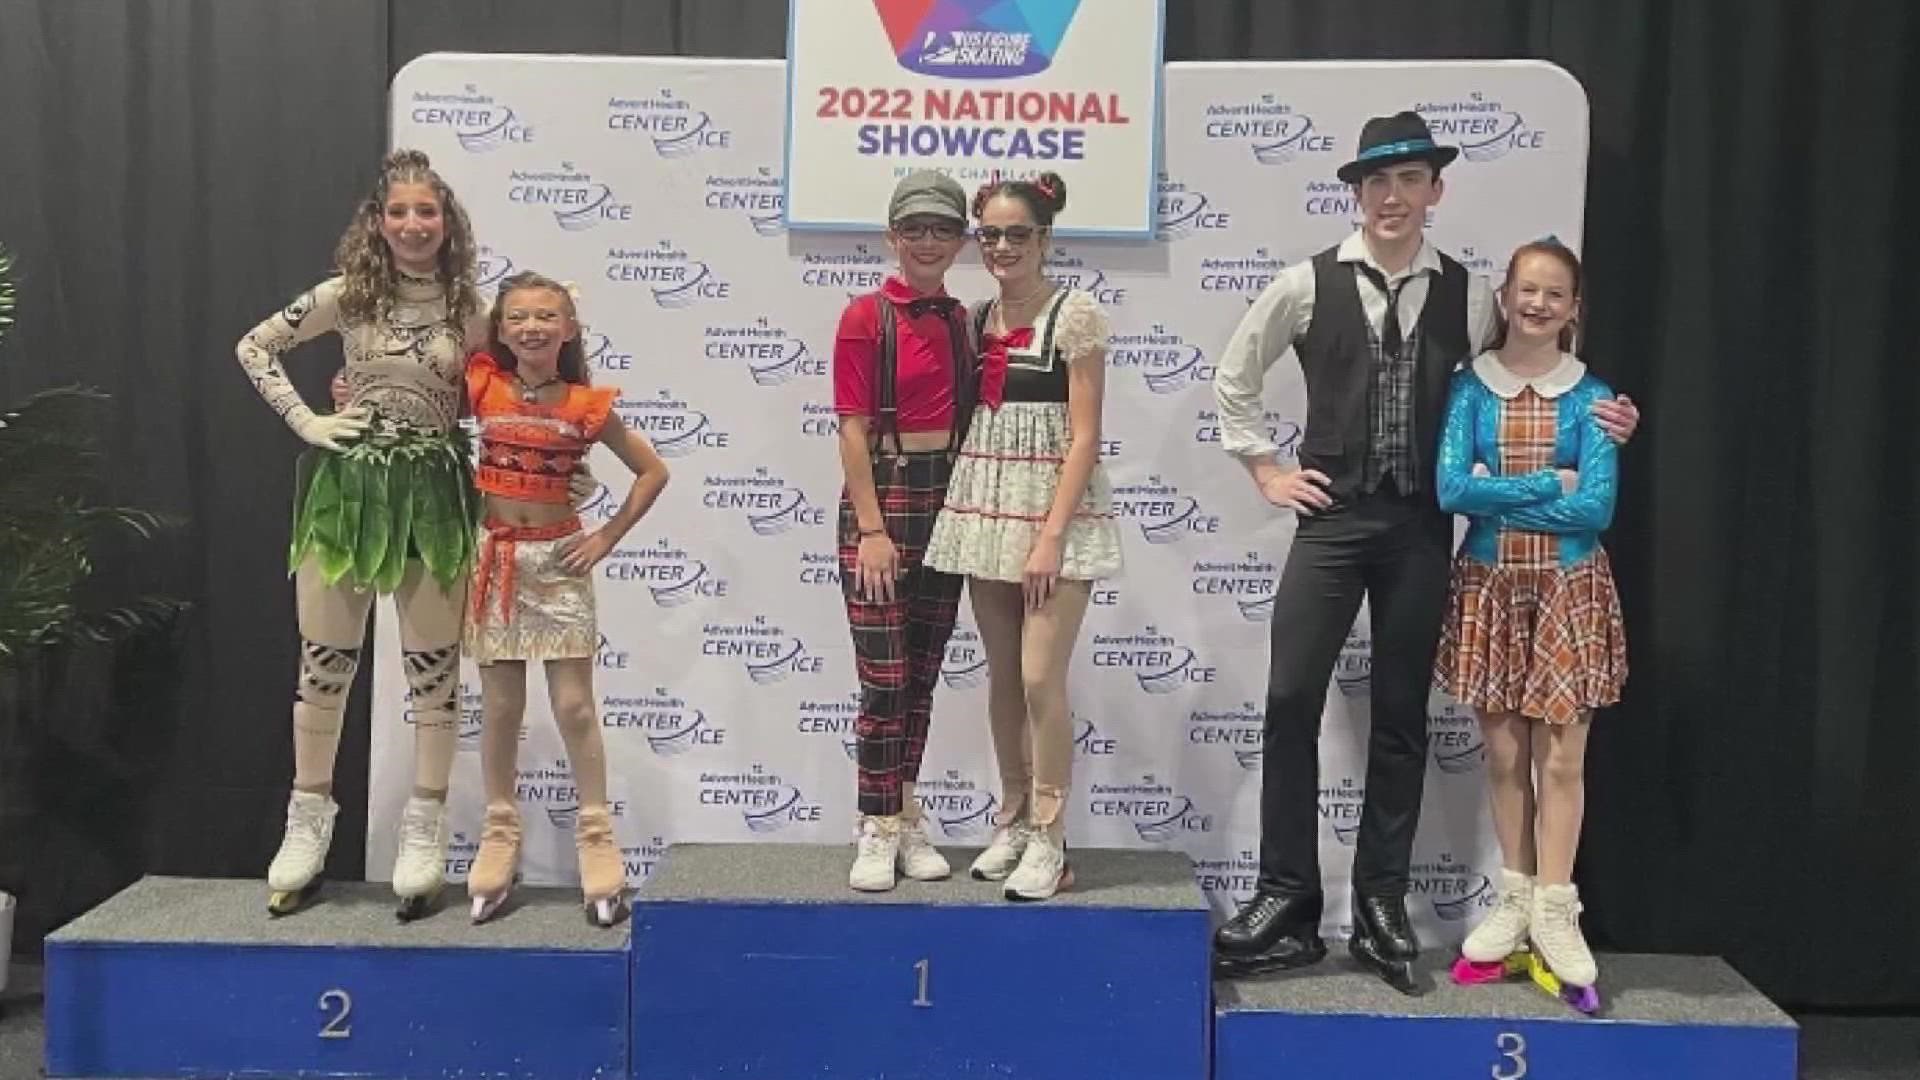 Local group of young figure skaters represent Knoxville at national level. Submit your nominations for 10 Rising Hearts 10hearts@wbir.com  August 10, 2022-4pm.